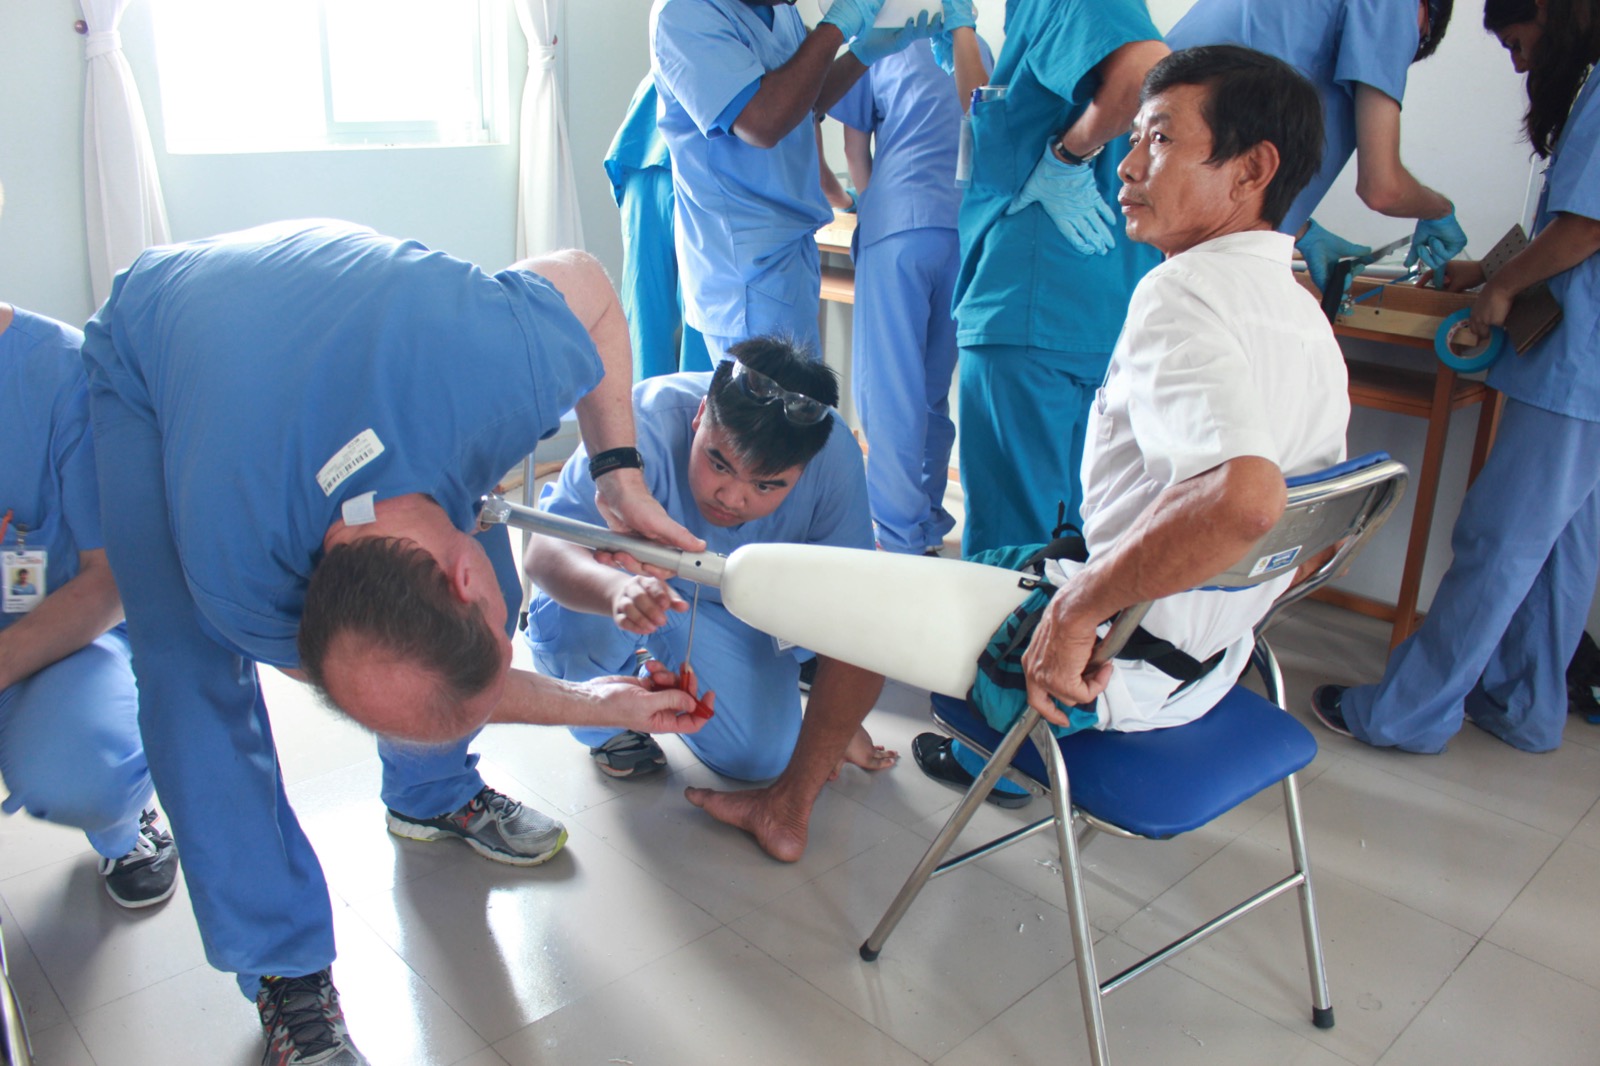 Dr. McMahan attending to man with prosthetic leg